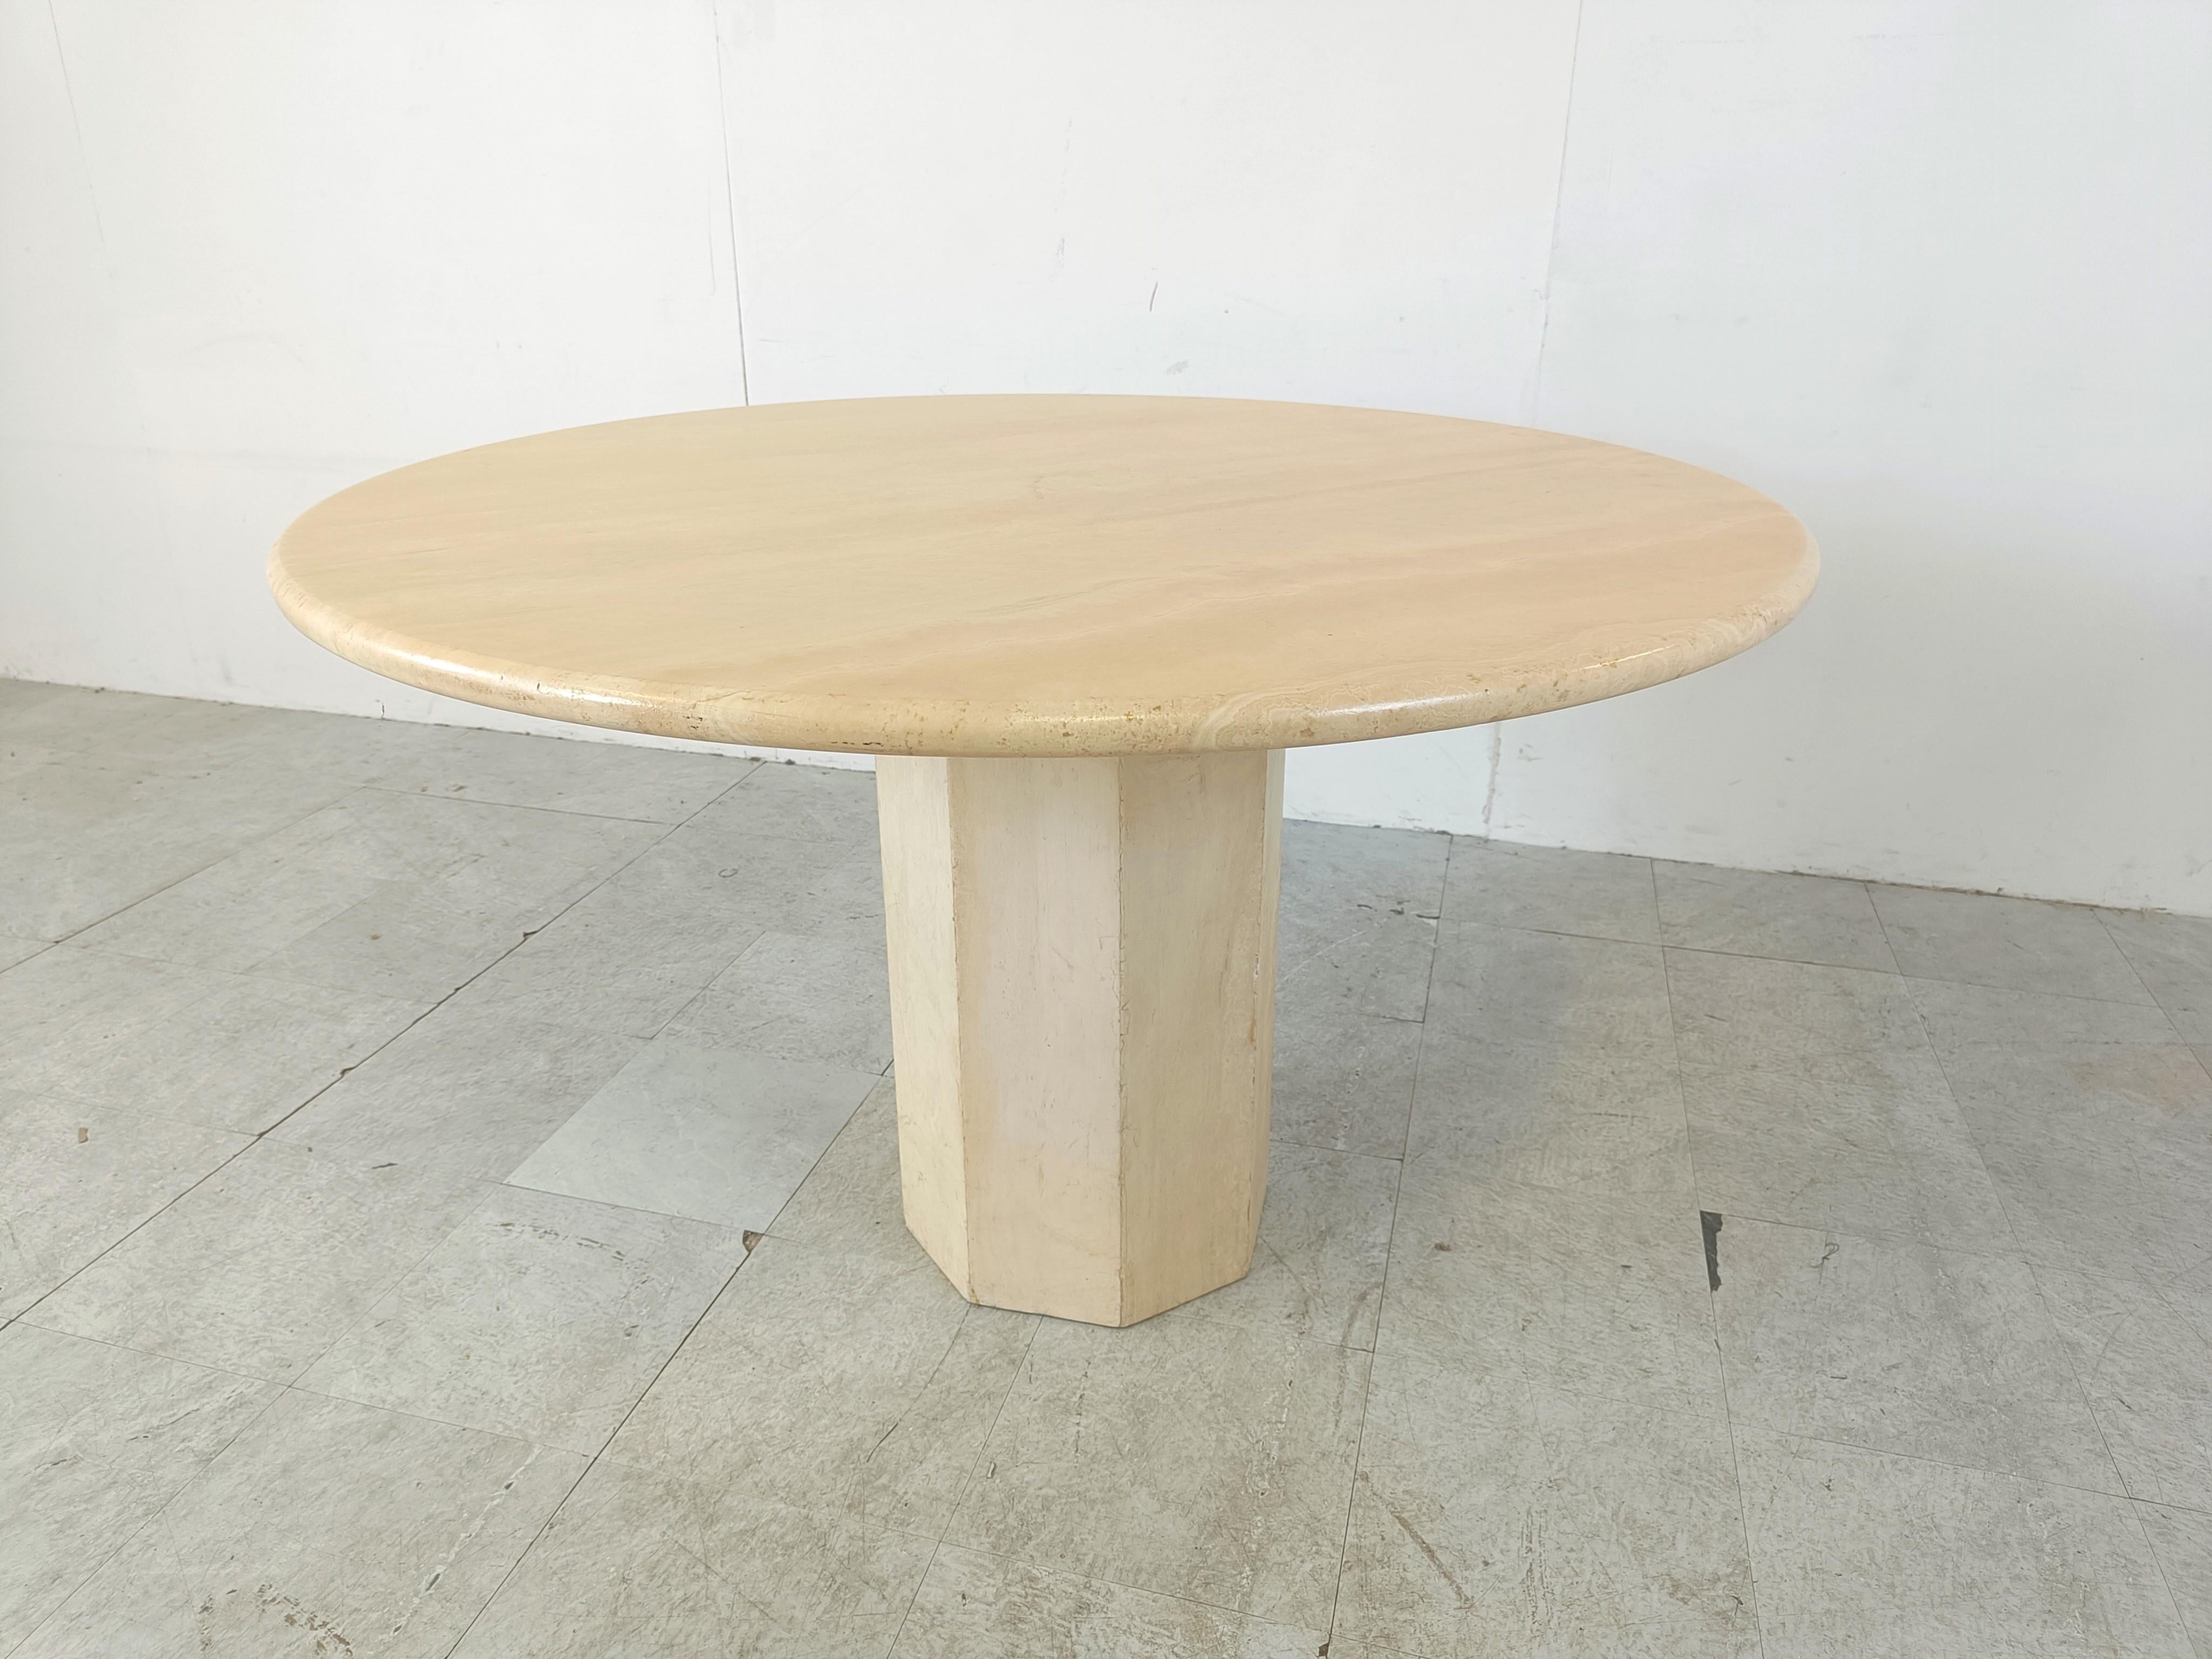 Beautiful dining table or center table made from travertine stone.

Has an extra support for the top to make it steadier. 

Elegant round table top.

Good condition

1970s - Italy

Height: 73cm/28.74